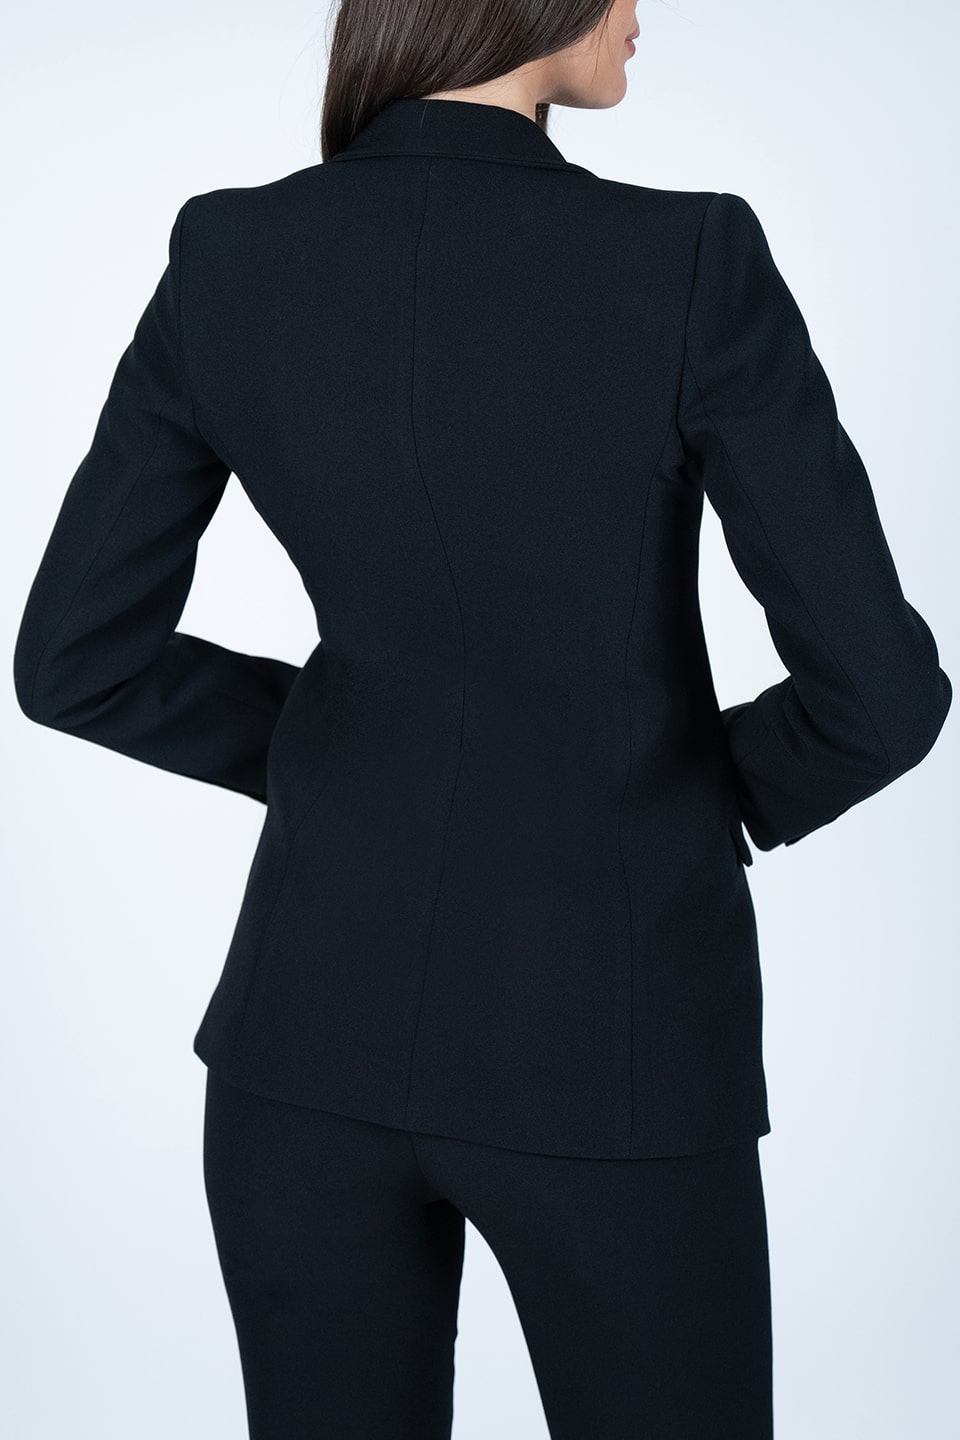 Thumbnail for Product gallery 3, Cady Black Blazer